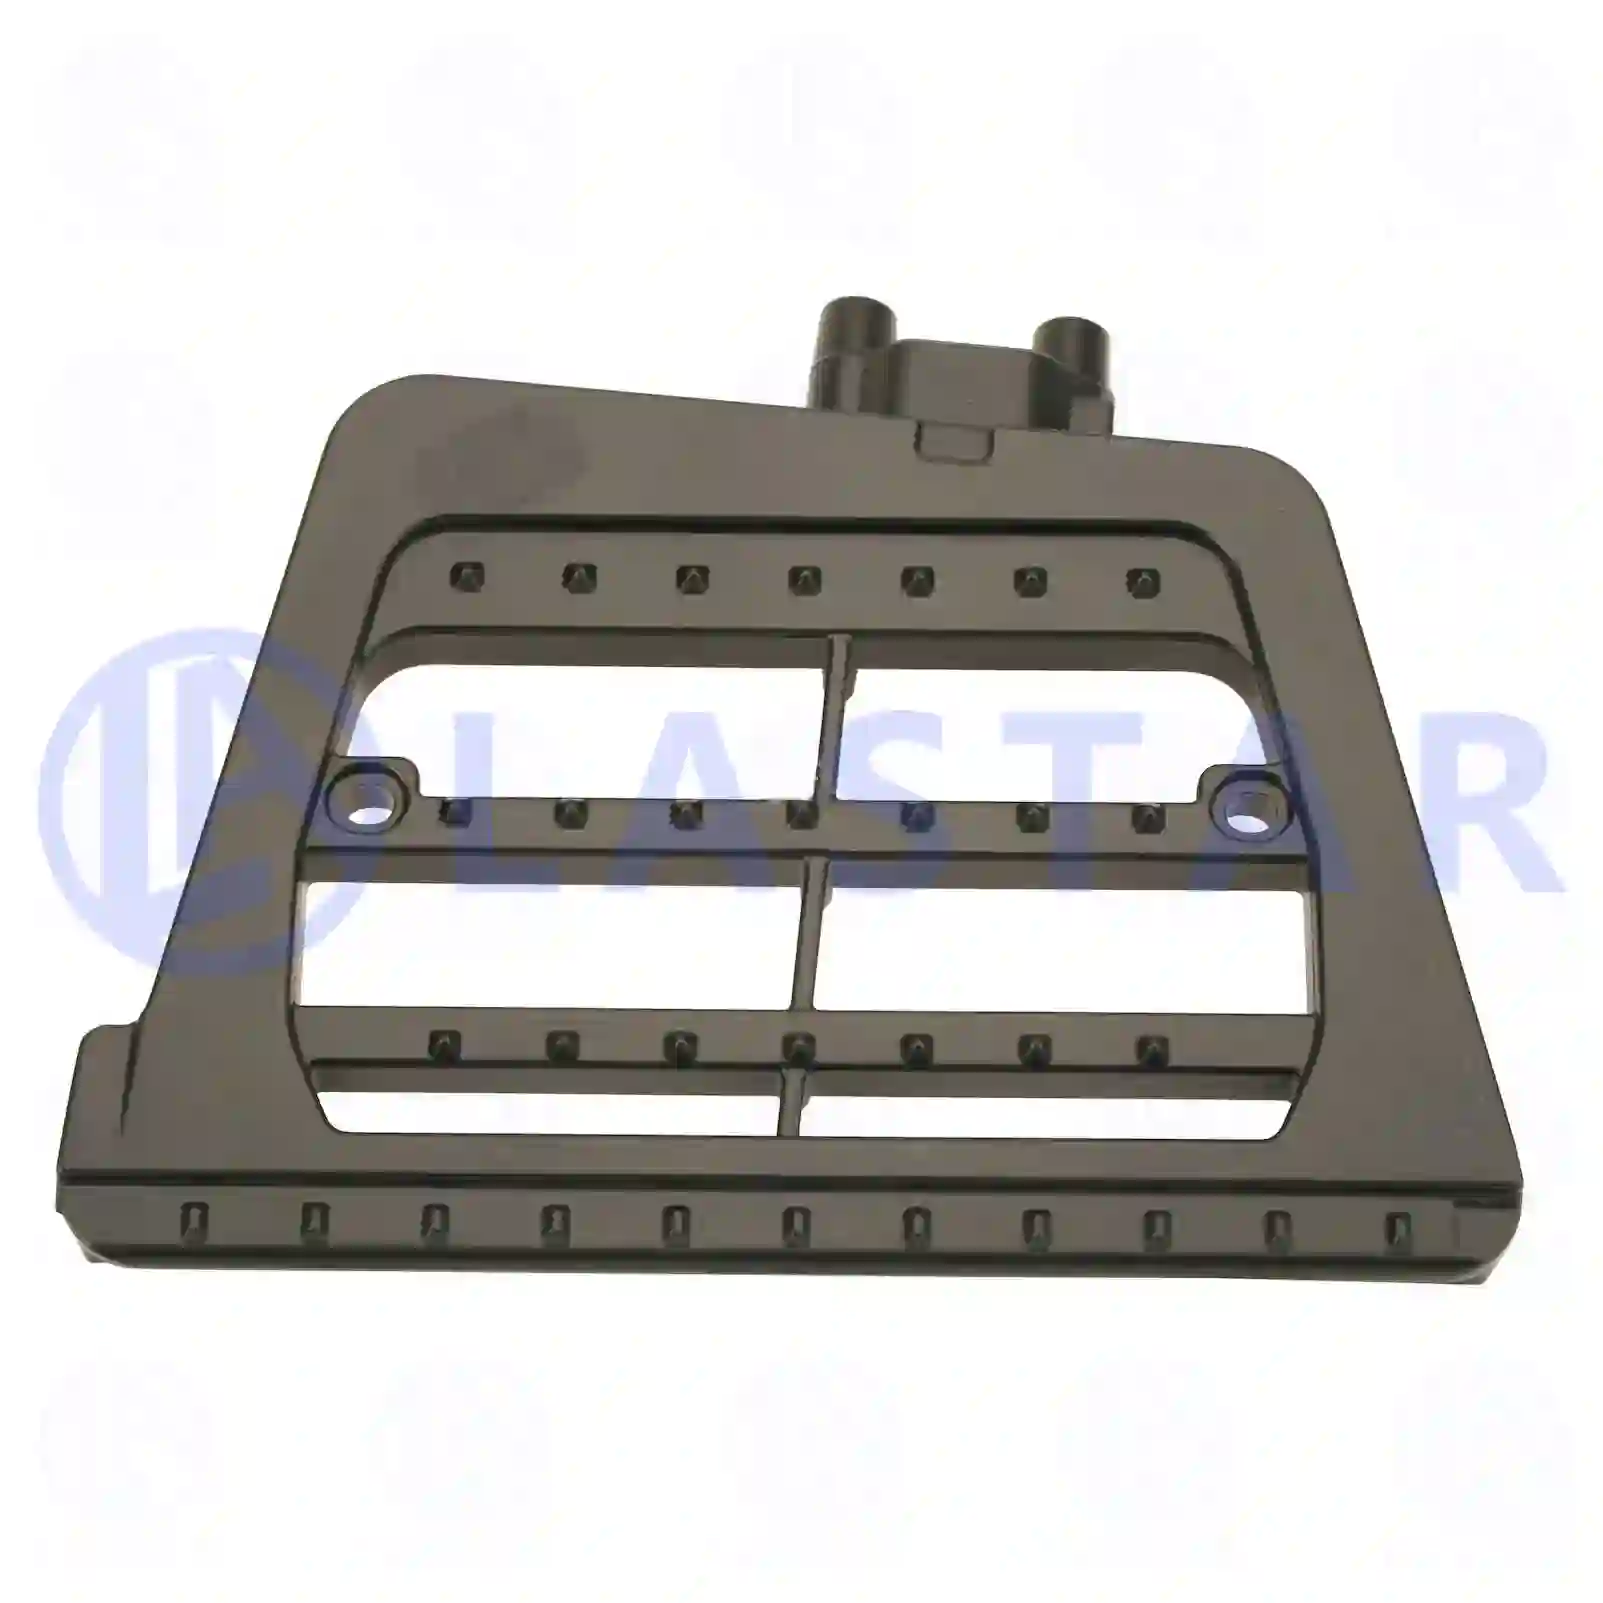 Step, right, 77719737, 1368837, 1638481, ZG61164-0008 ||  77719737 Lastar Spare Part | Truck Spare Parts, Auotomotive Spare Parts Step, right, 77719737, 1368837, 1638481, ZG61164-0008 ||  77719737 Lastar Spare Part | Truck Spare Parts, Auotomotive Spare Parts